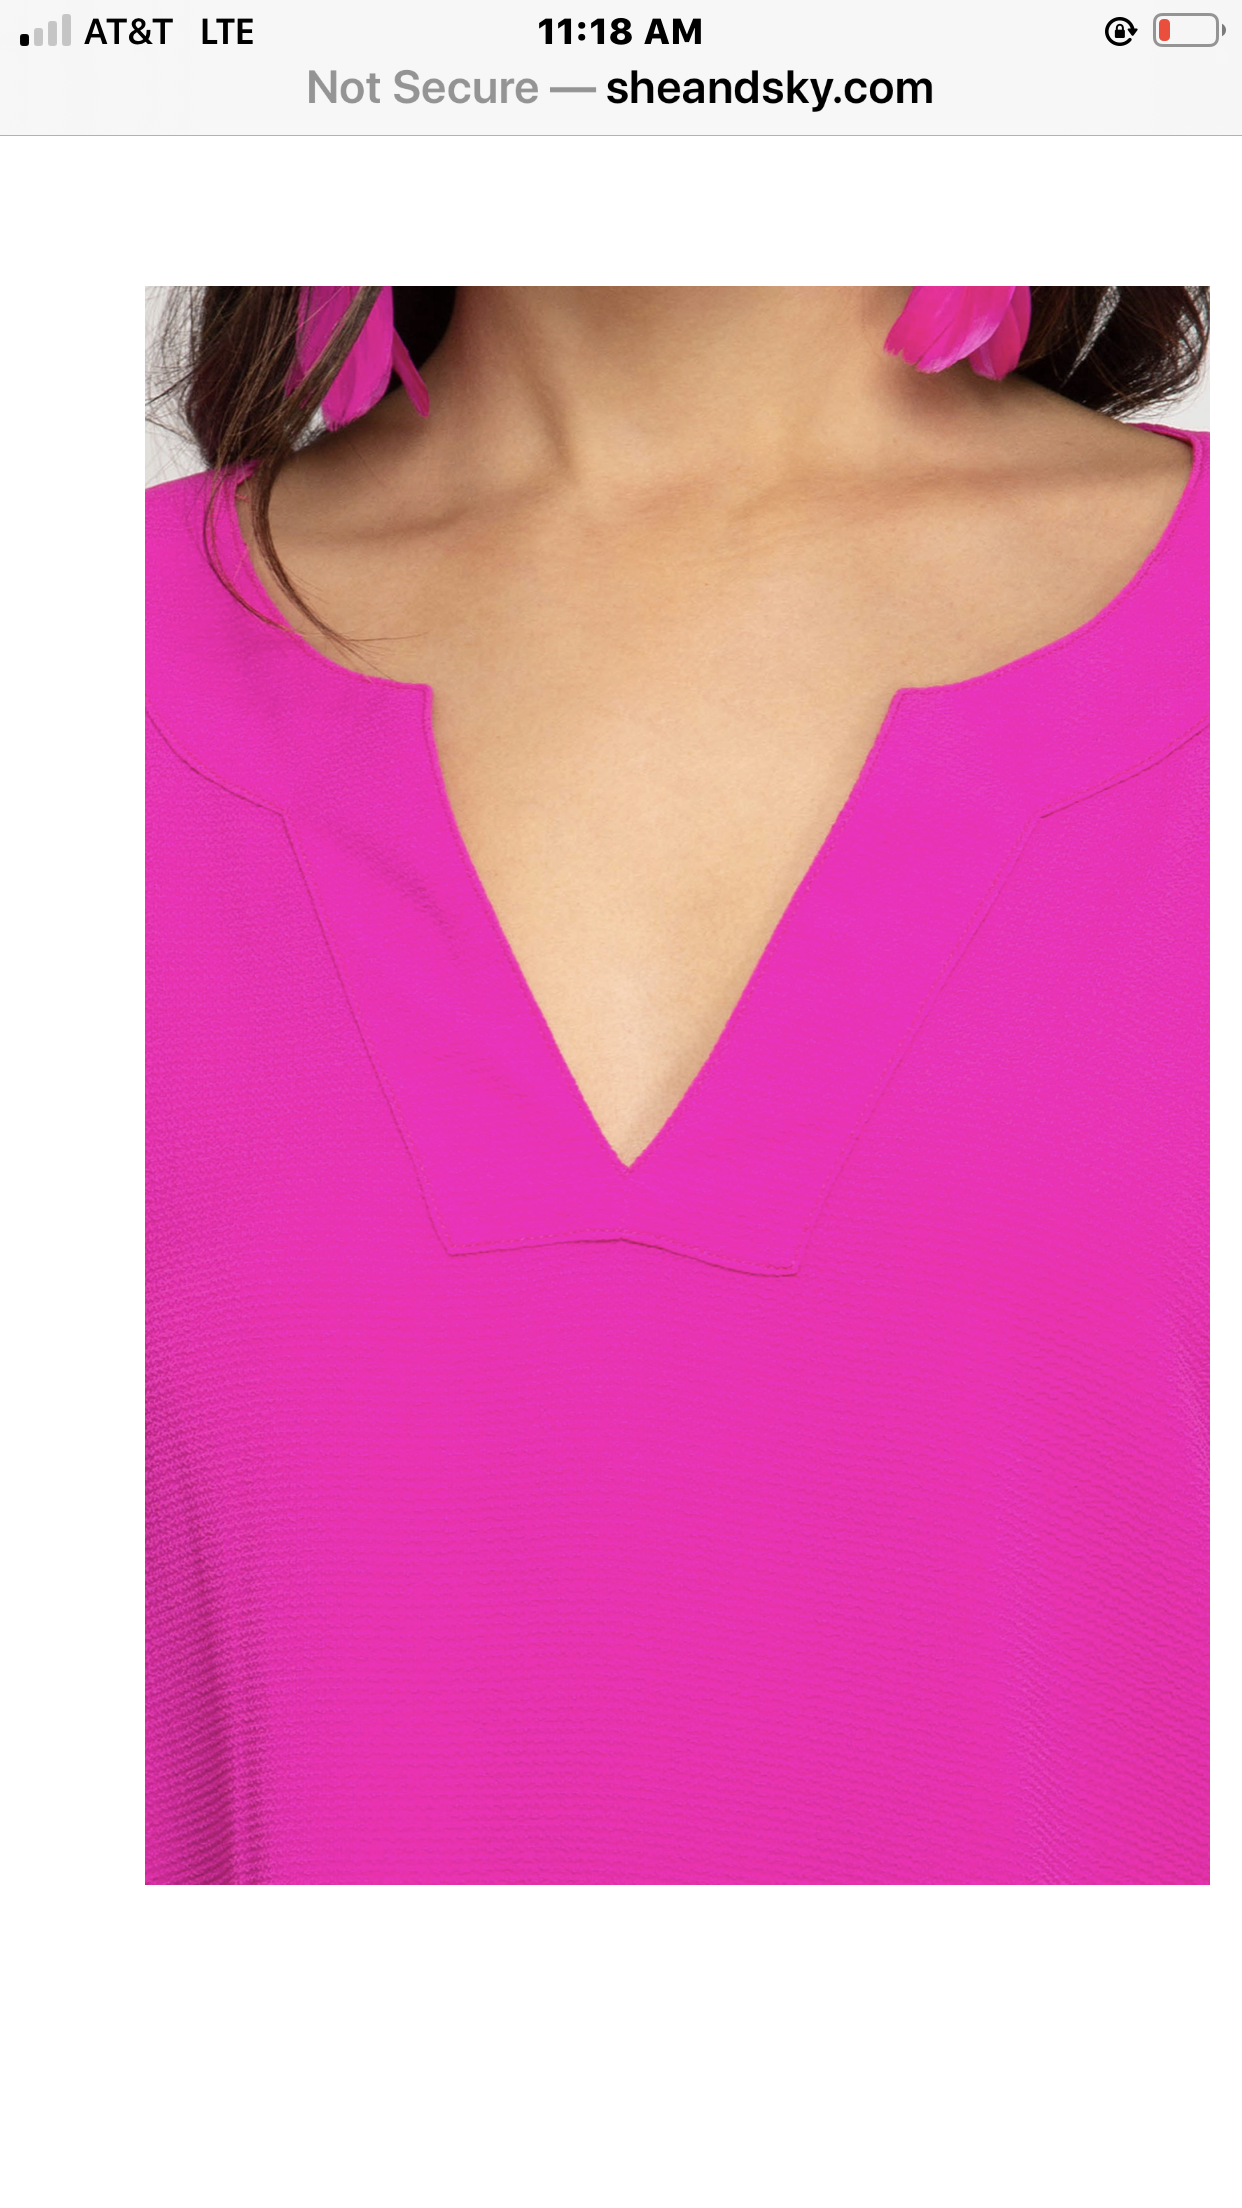 Bree Woven V-Neck Top - Corinne an Affordable Women's Clothing Boutique in the US USA